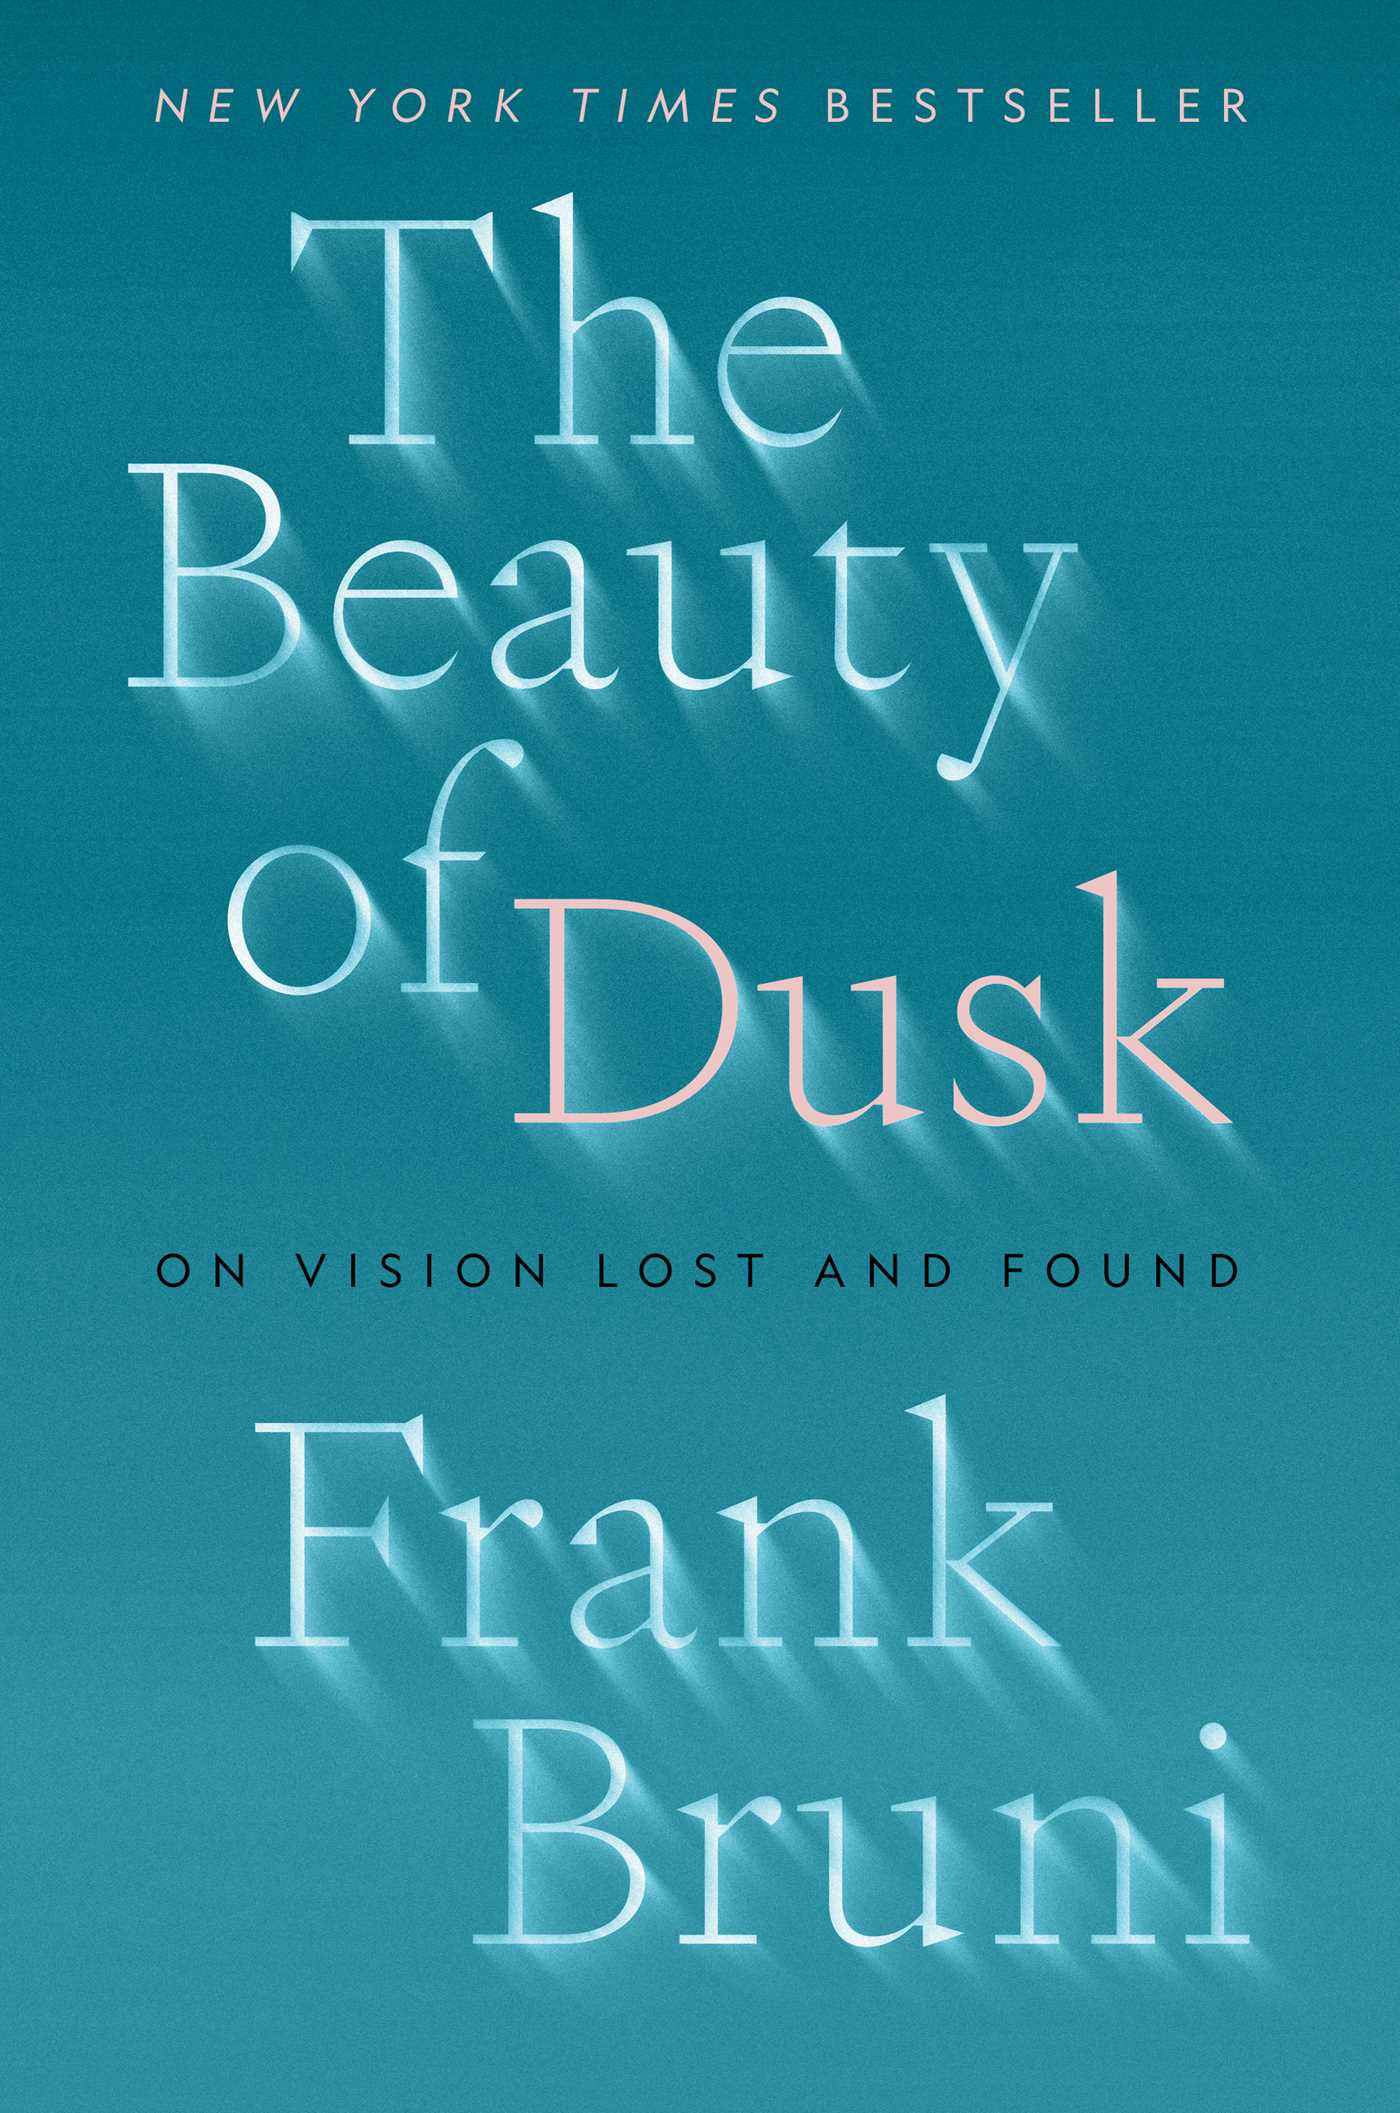 The cover of The Beauty of Dusk by Frank Bruni